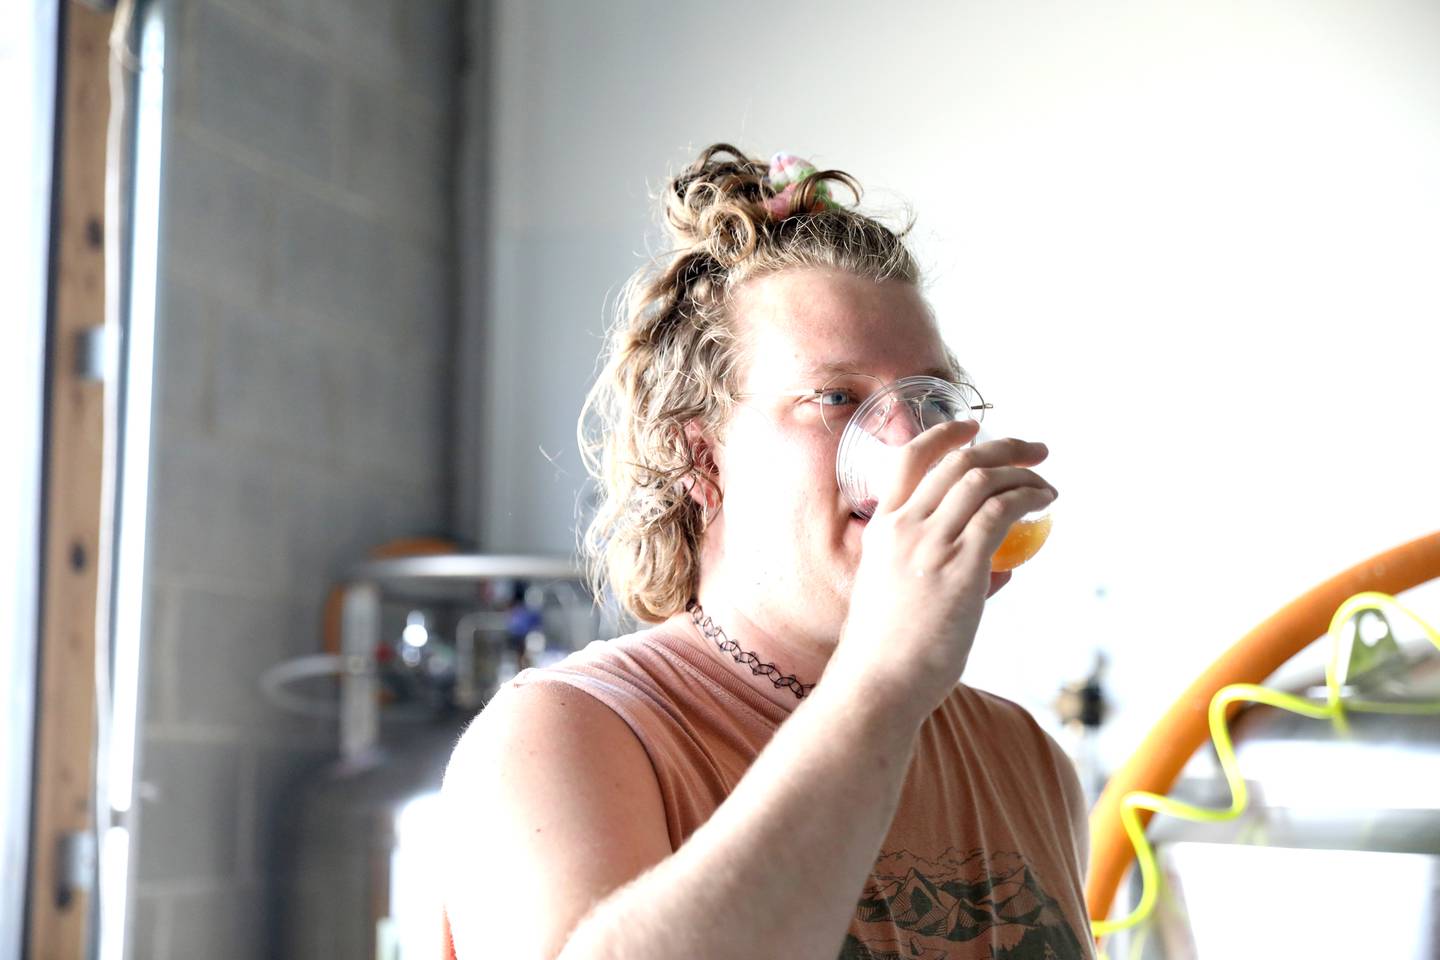 Co-founder Josh Carnell samples horchata root beer at Sunset Soda in Geneva.  Sunset Soda began producing craft soda in small batches this past March.